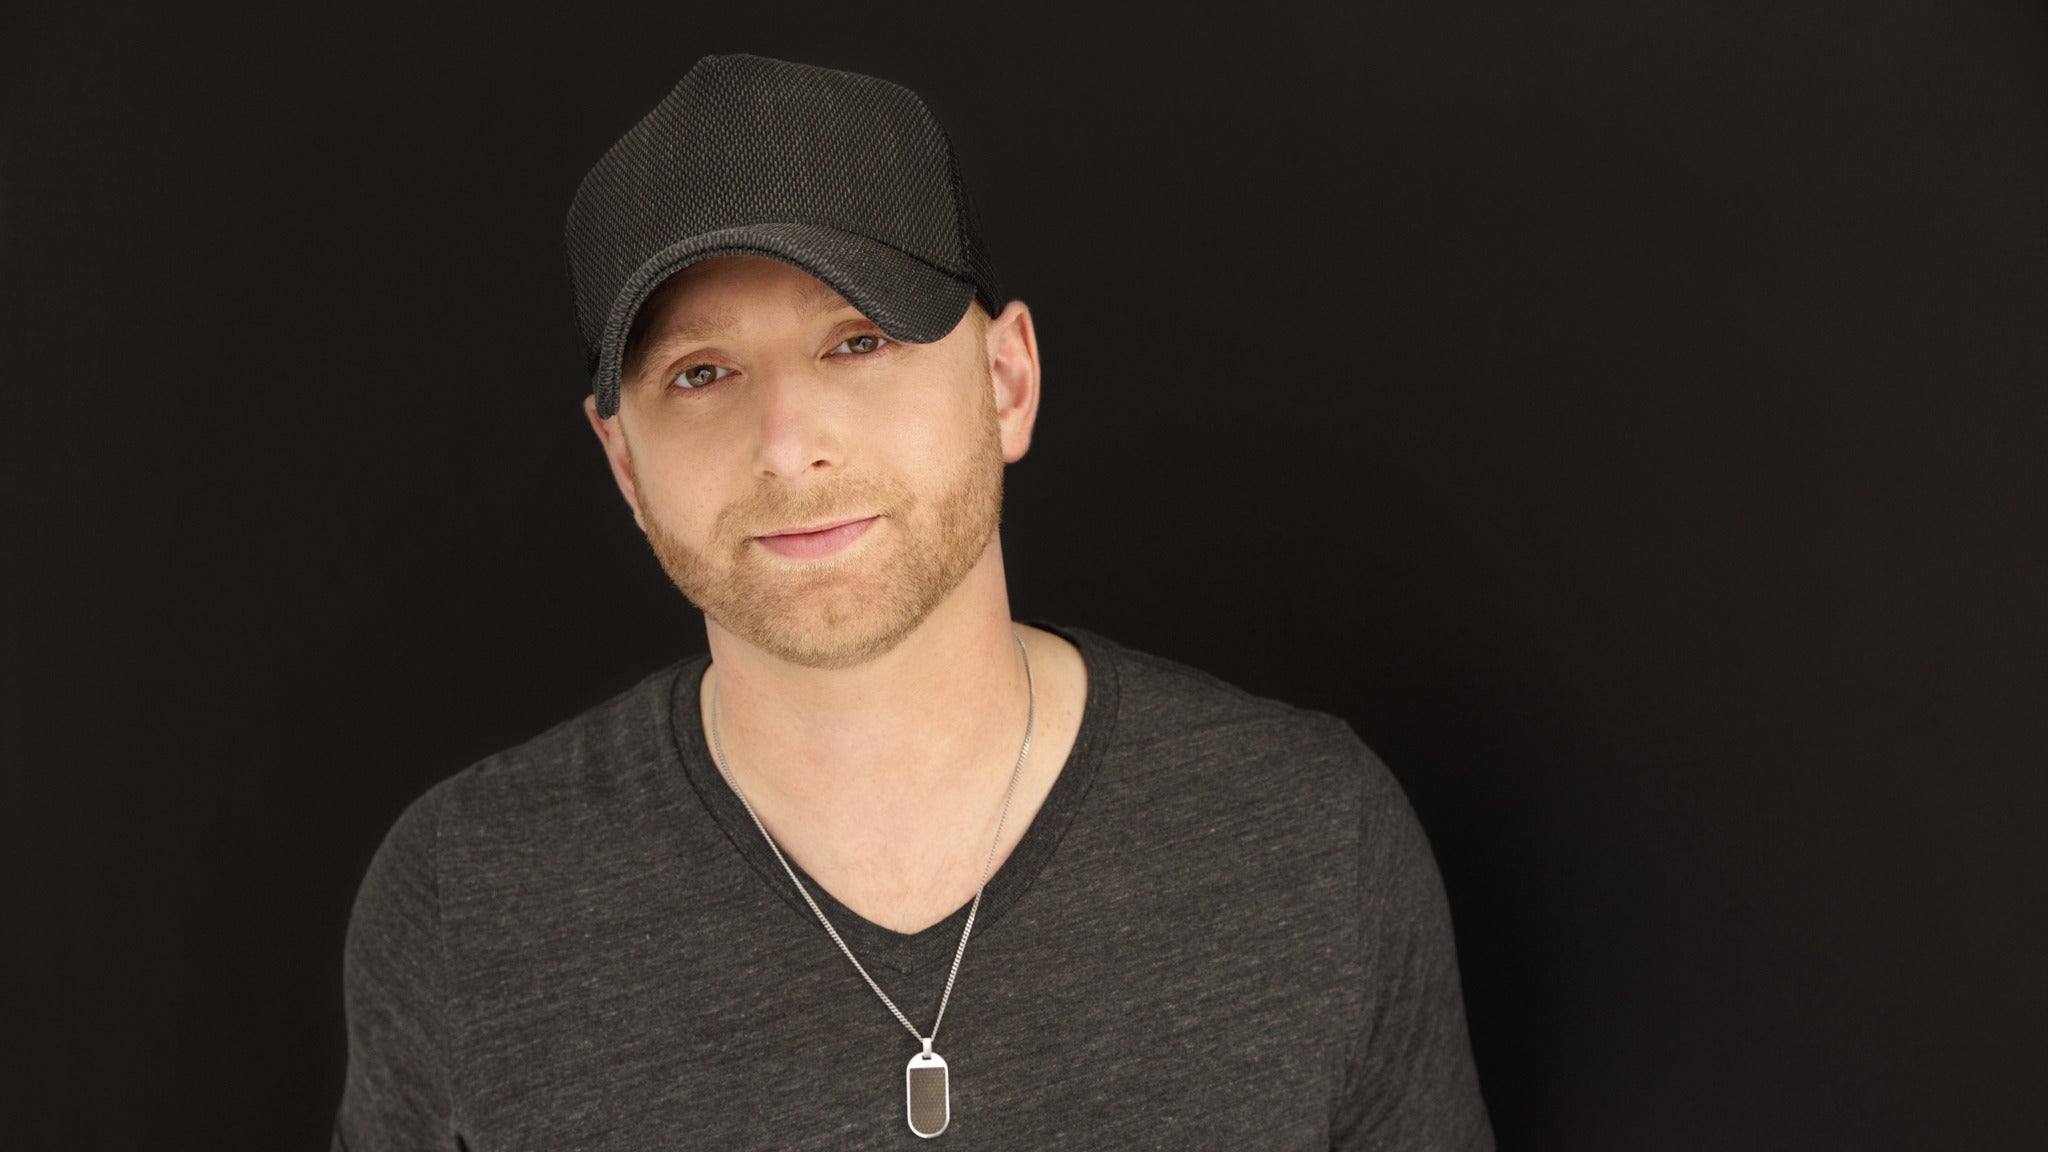 Tim Hicks Wreck This Town World Tour in Kingston promo photo for Live Nation presale offer code